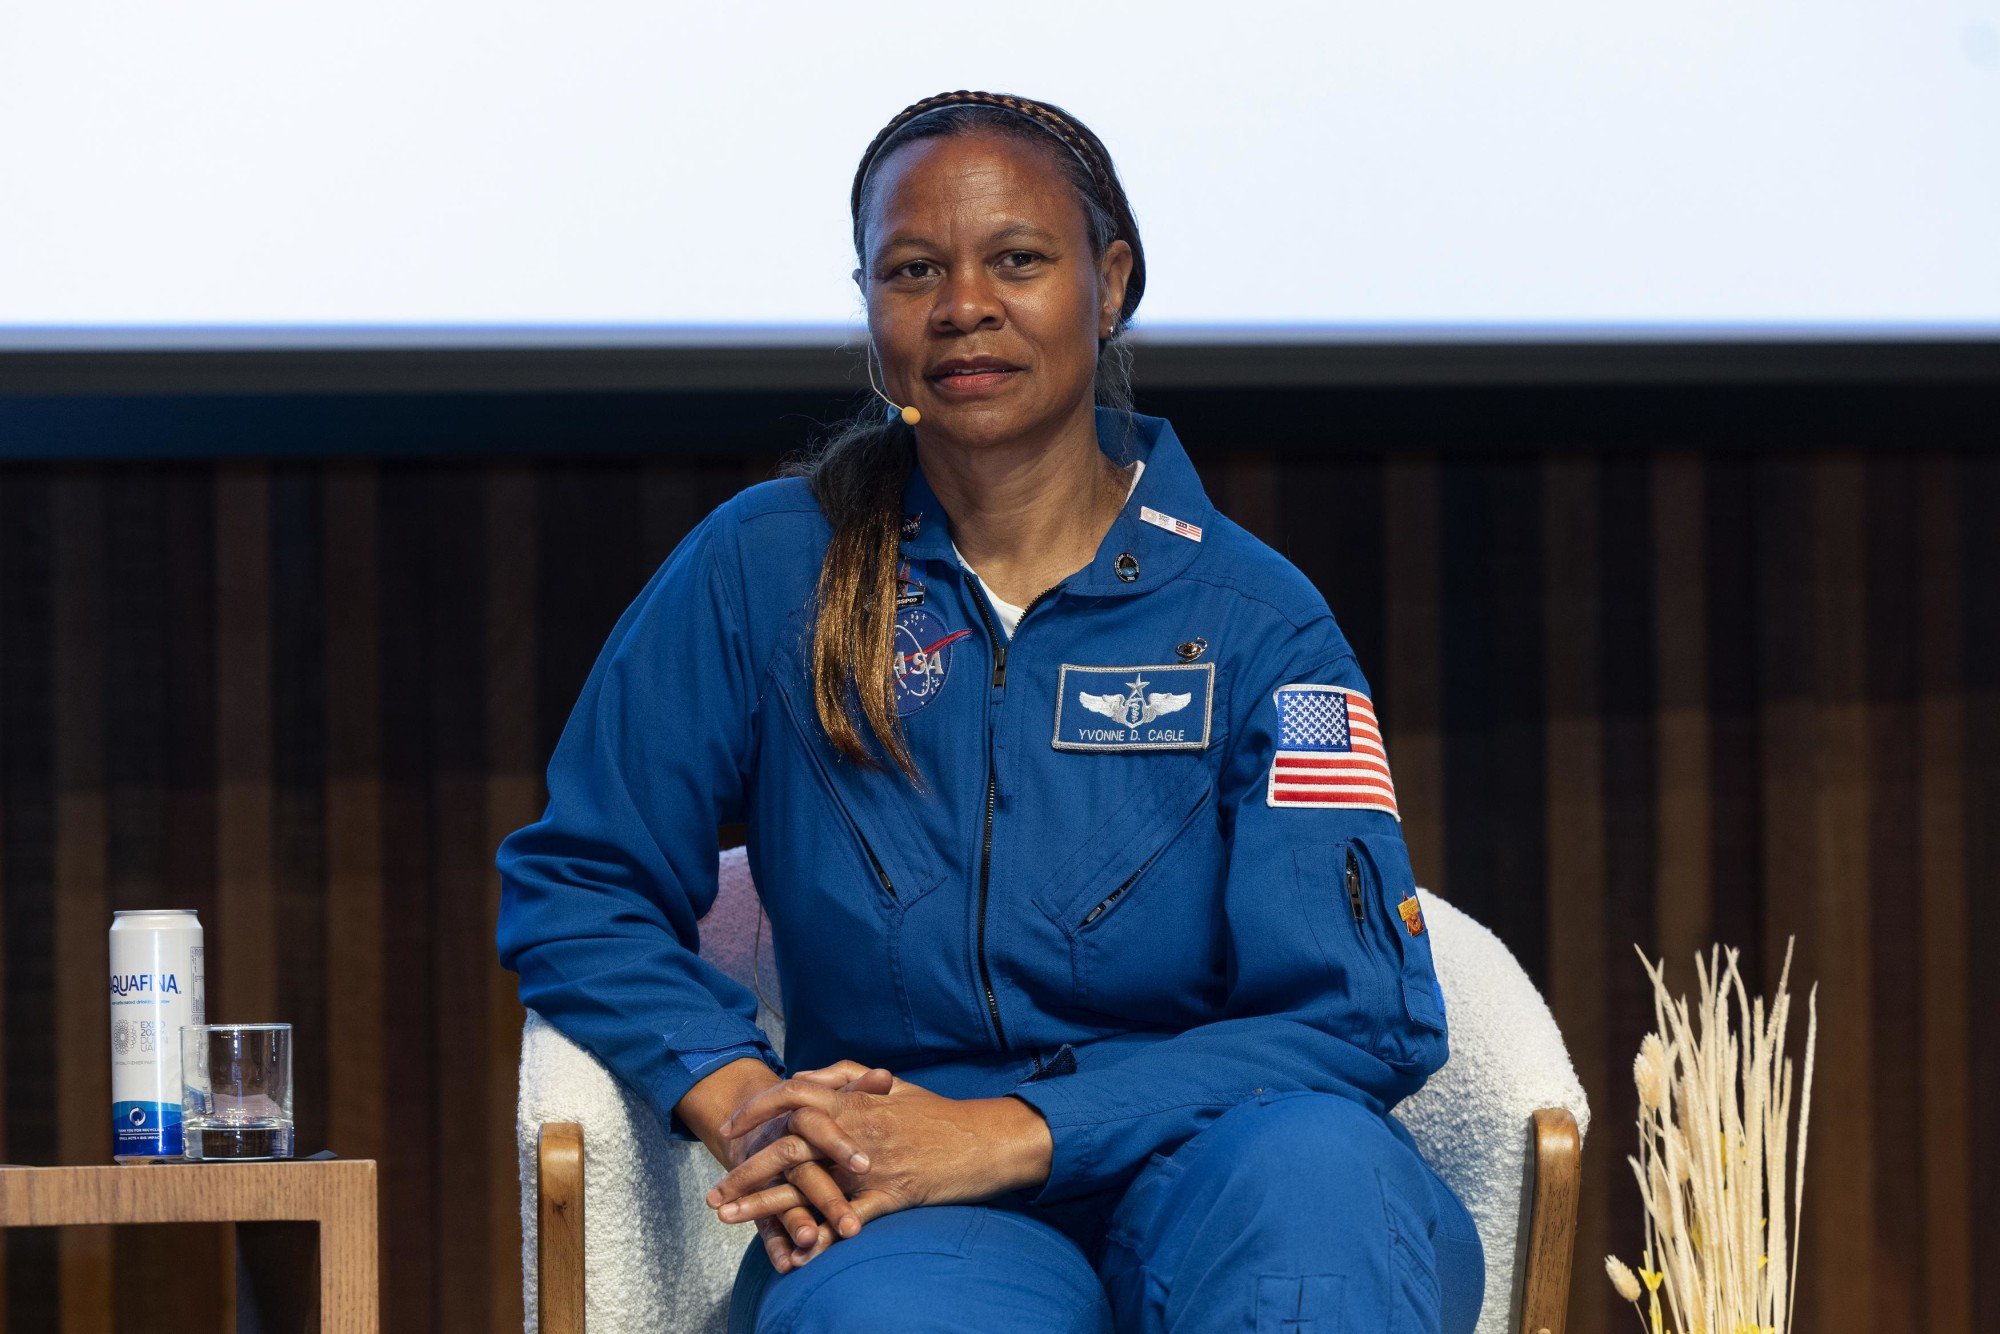 Dr__Yvonne_Cagle__Physician__professor__retired_Air_Force_Colonel_and_former_Astronaut__USA_during_the_World_Majlis_-_At_the.jpg